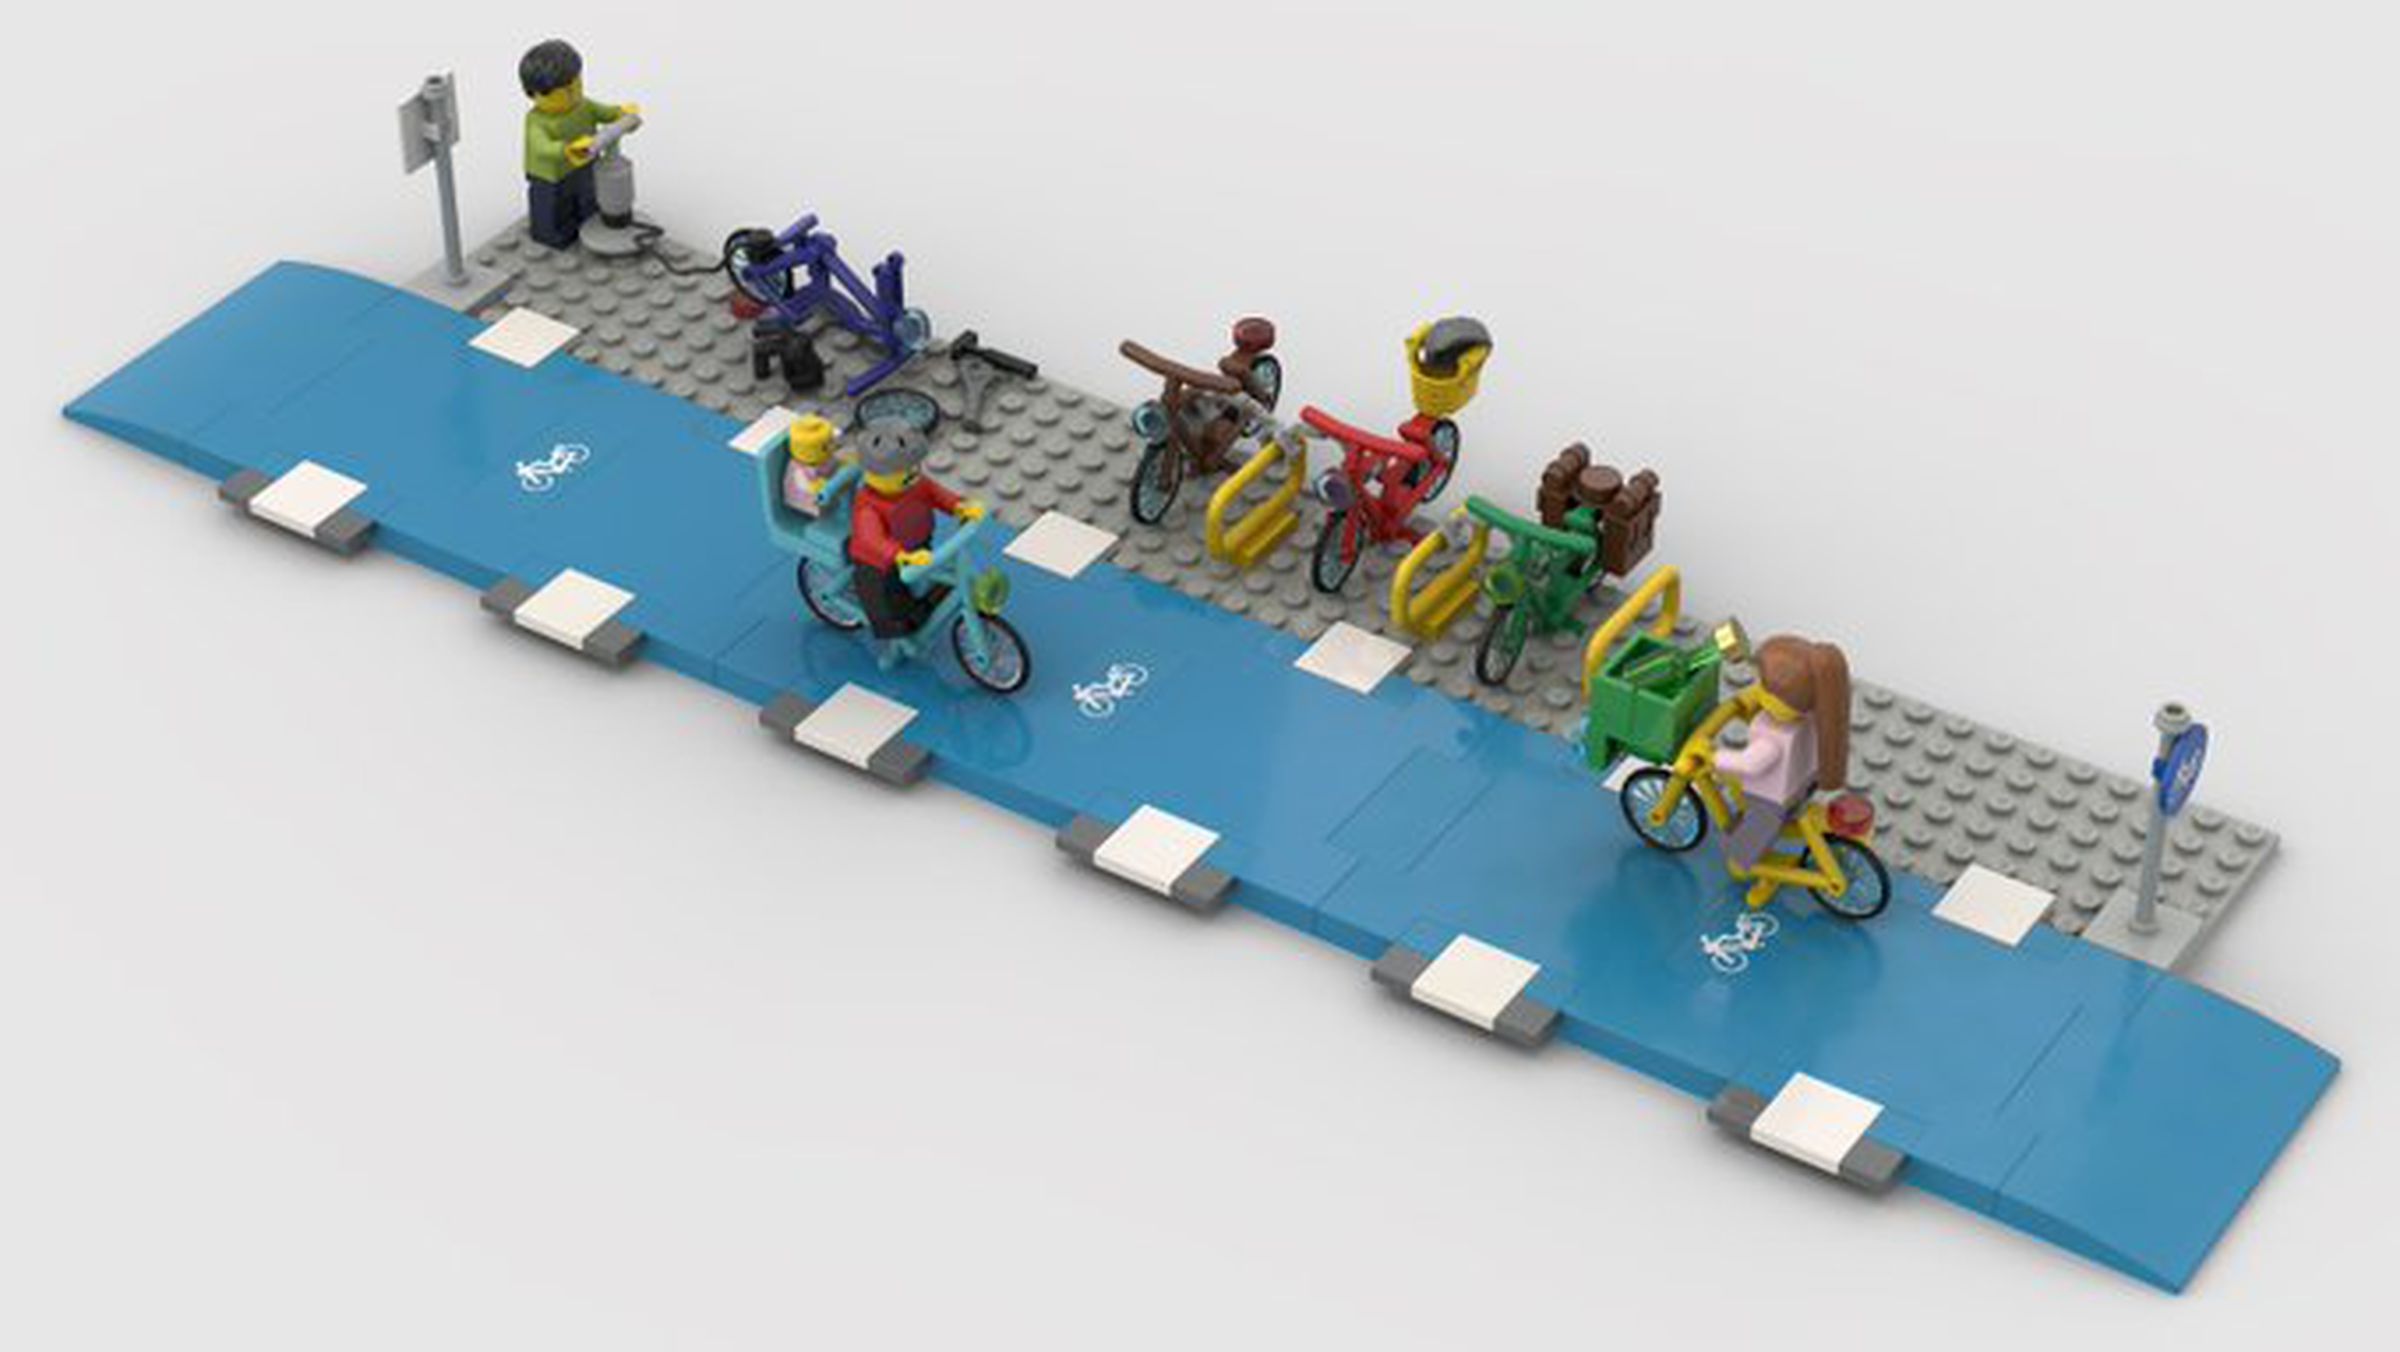 ﻿Imagining what Lego bike lanes could be.